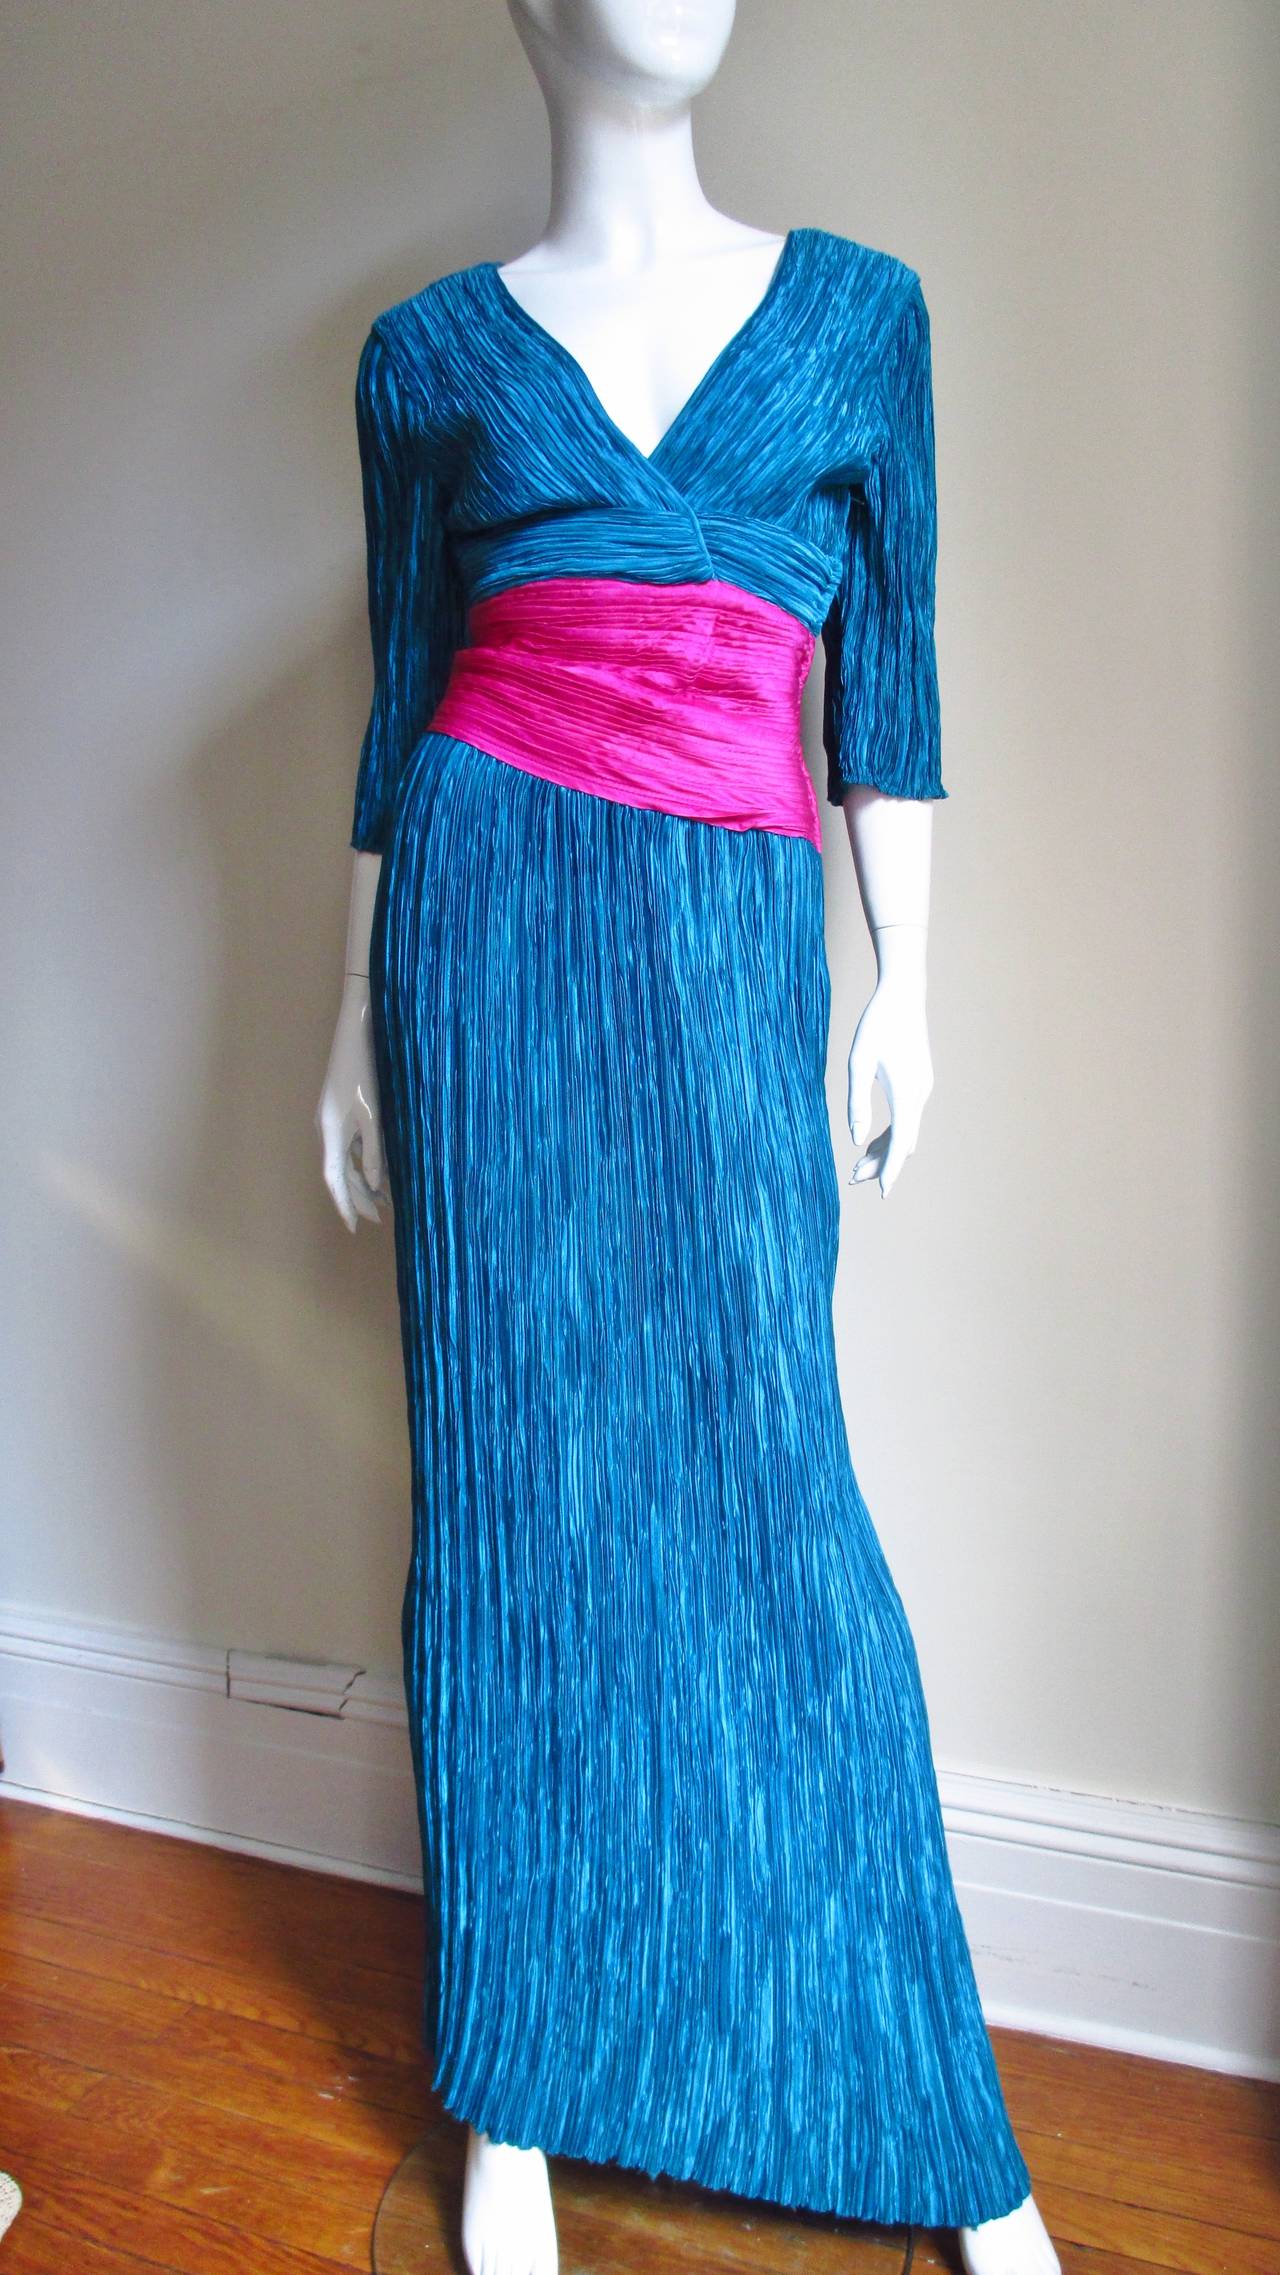 A beautiful turquoise and bright pink silk gown from Mary McFadden's Couture collection in her signature micro pleating. The bodice has a crossing plunging neckline front and back, elbow length sleeves and a bright pink horizontal band at the waist.